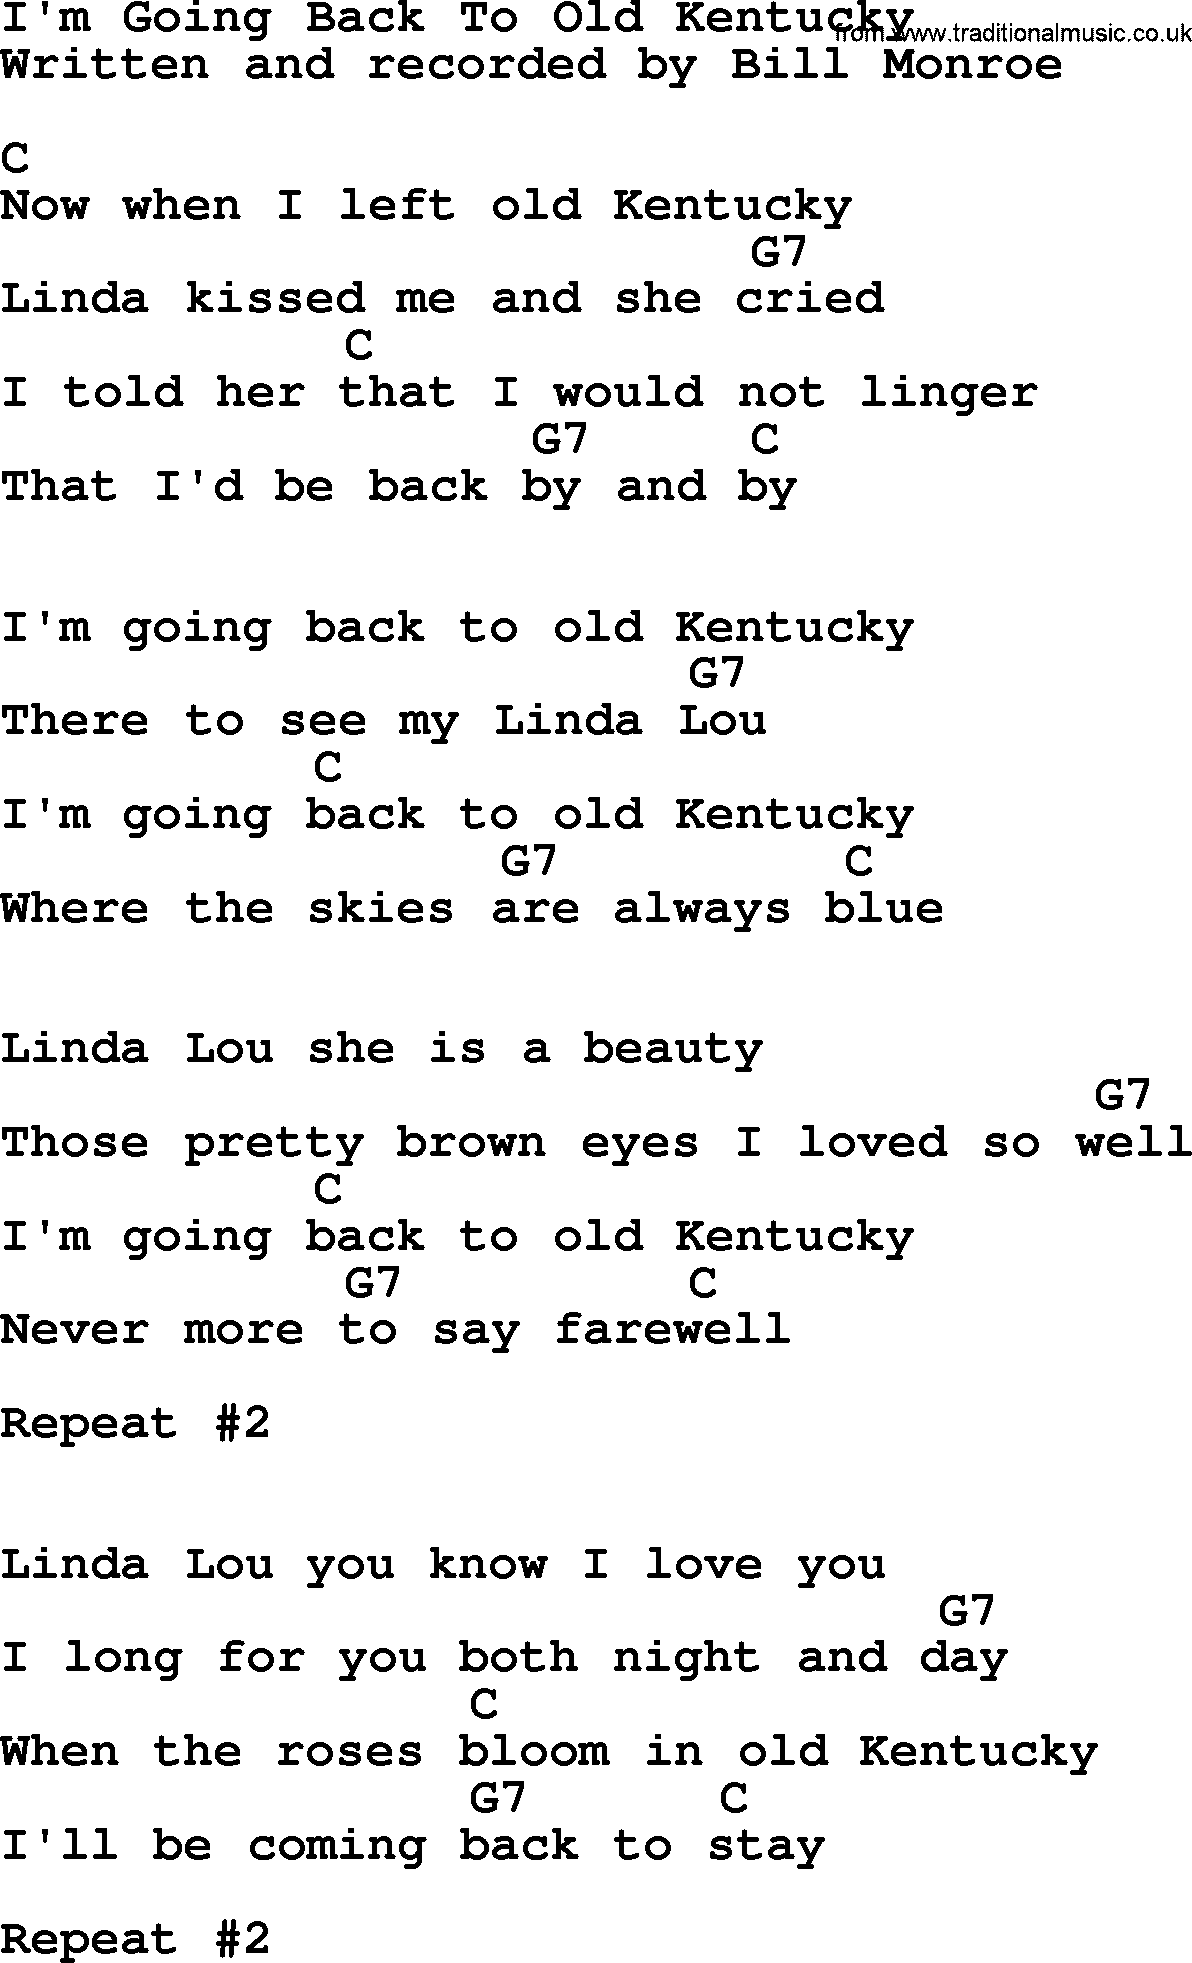 Bluegrass song: I'm Going Back To Old Kentucky, lyrics and chords